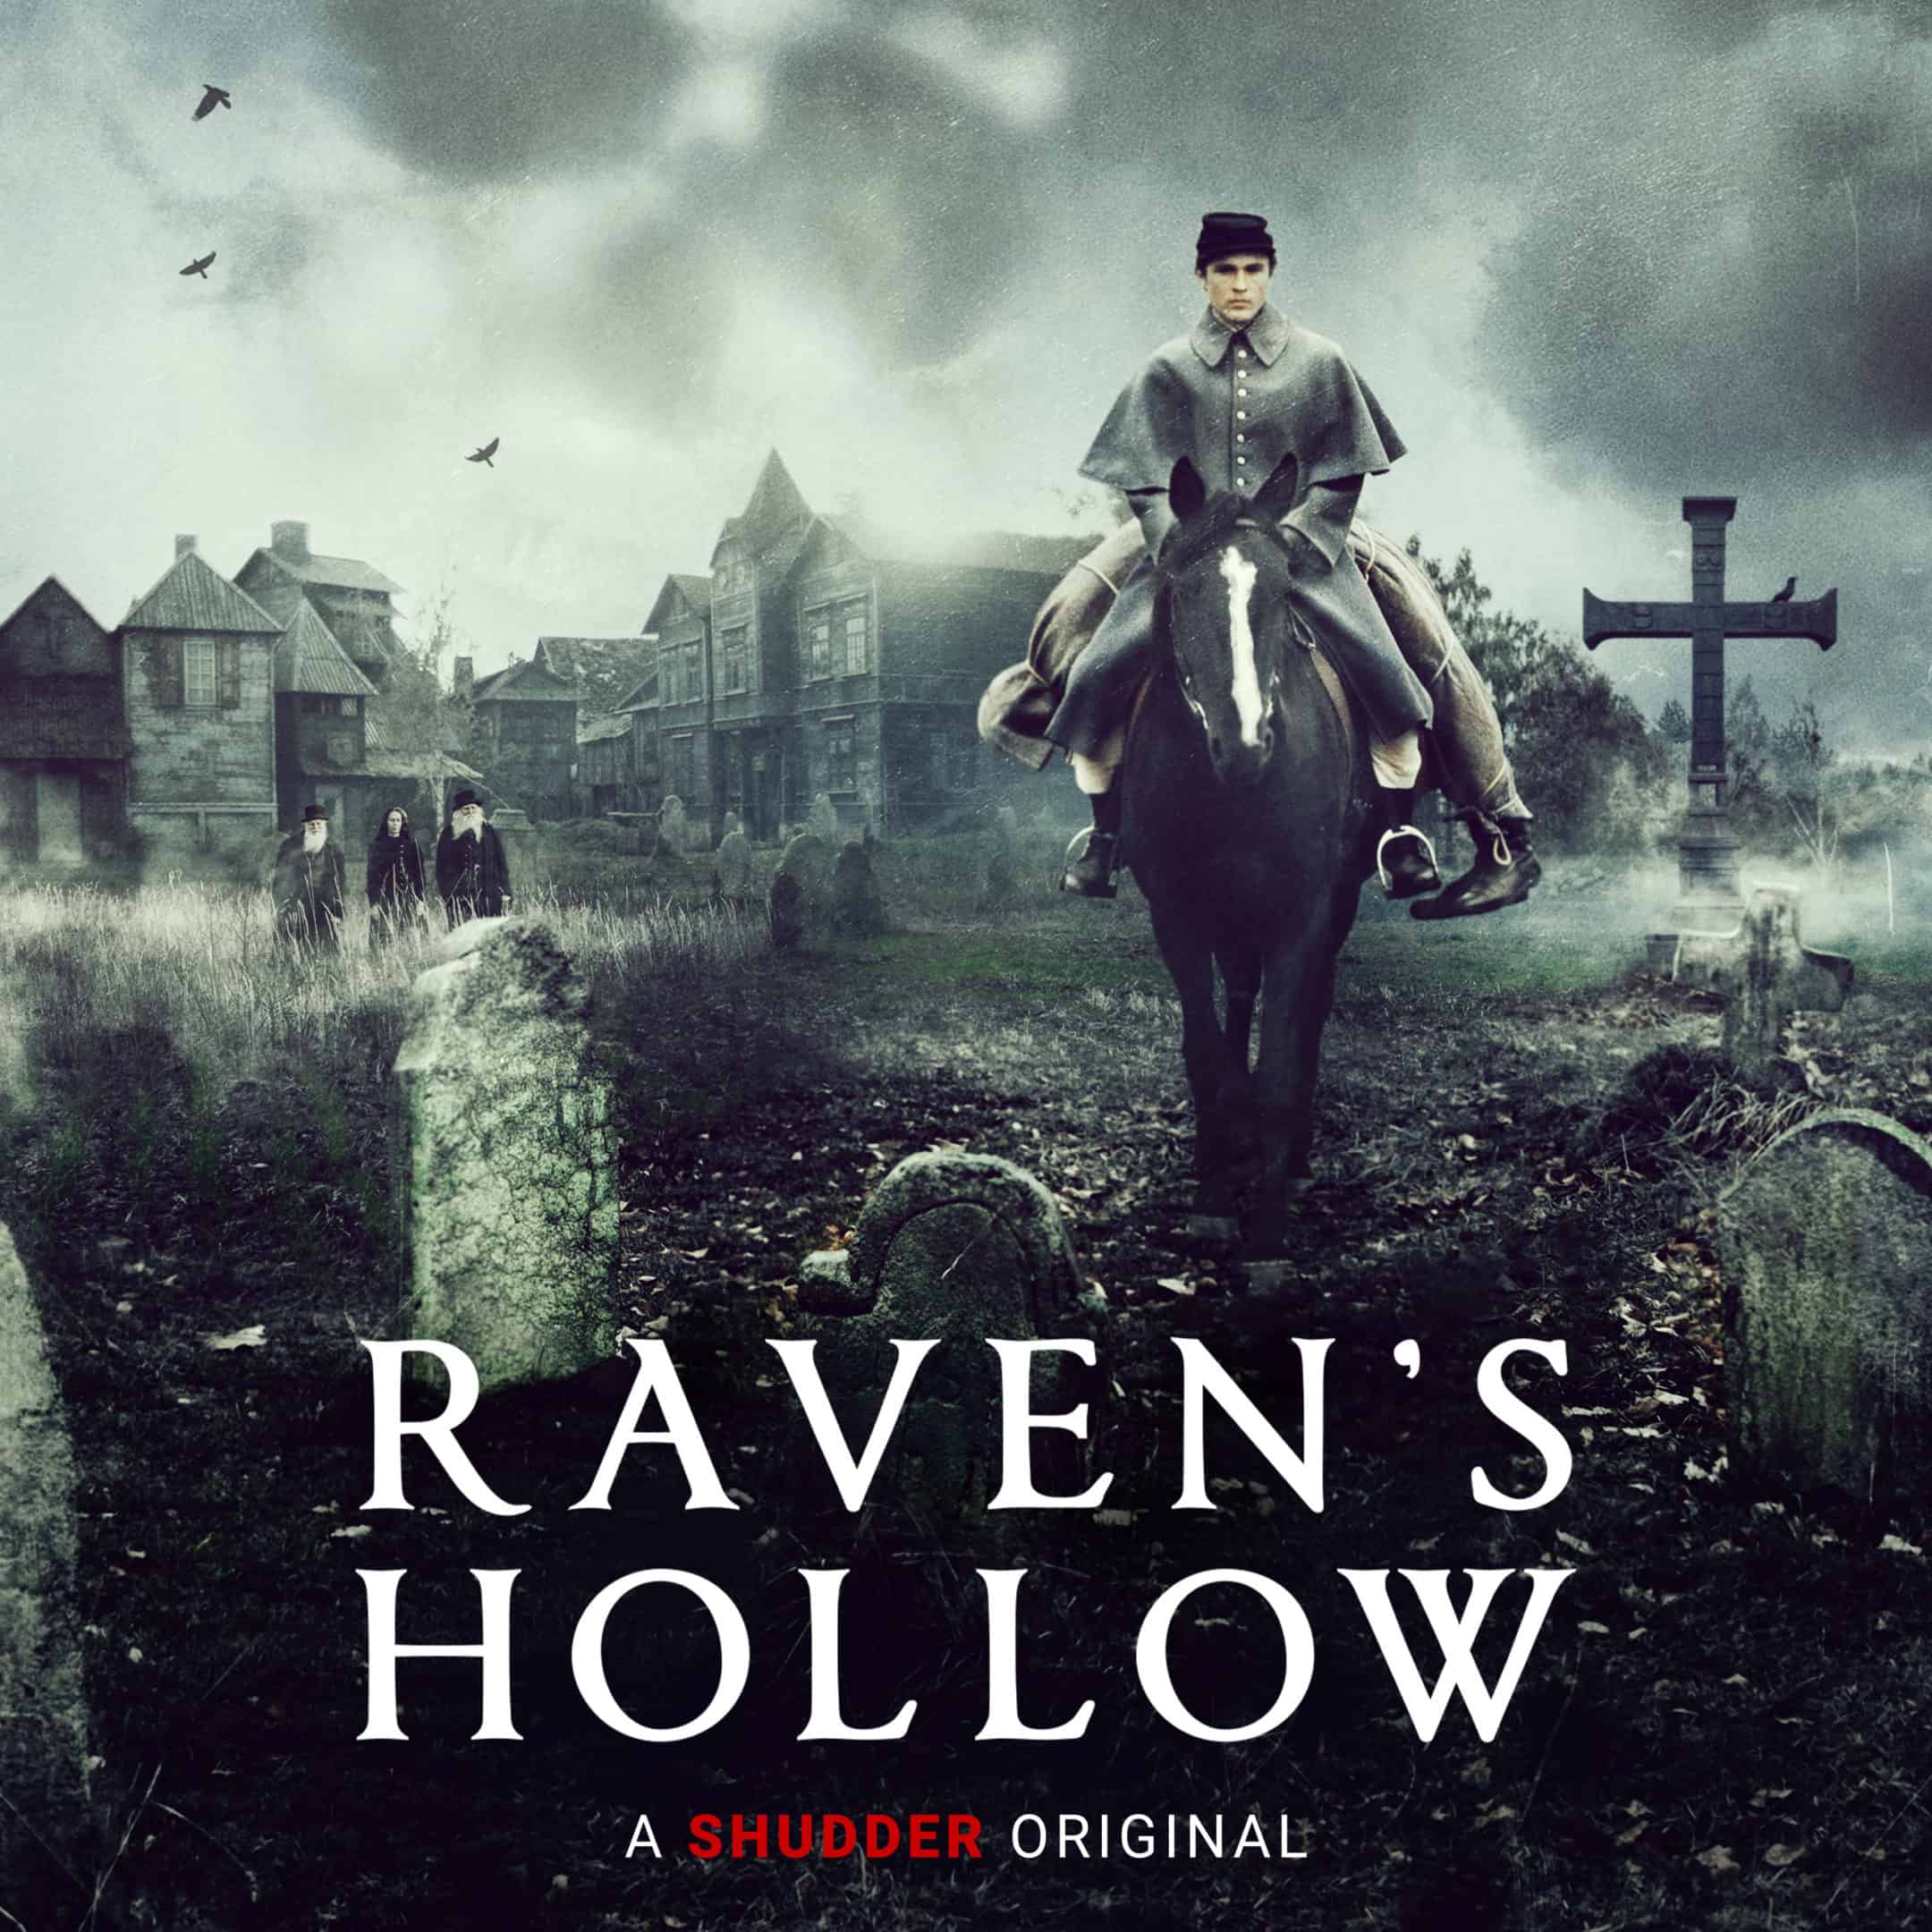 Raven's Hollow comes to Shudder on September 22nd 2